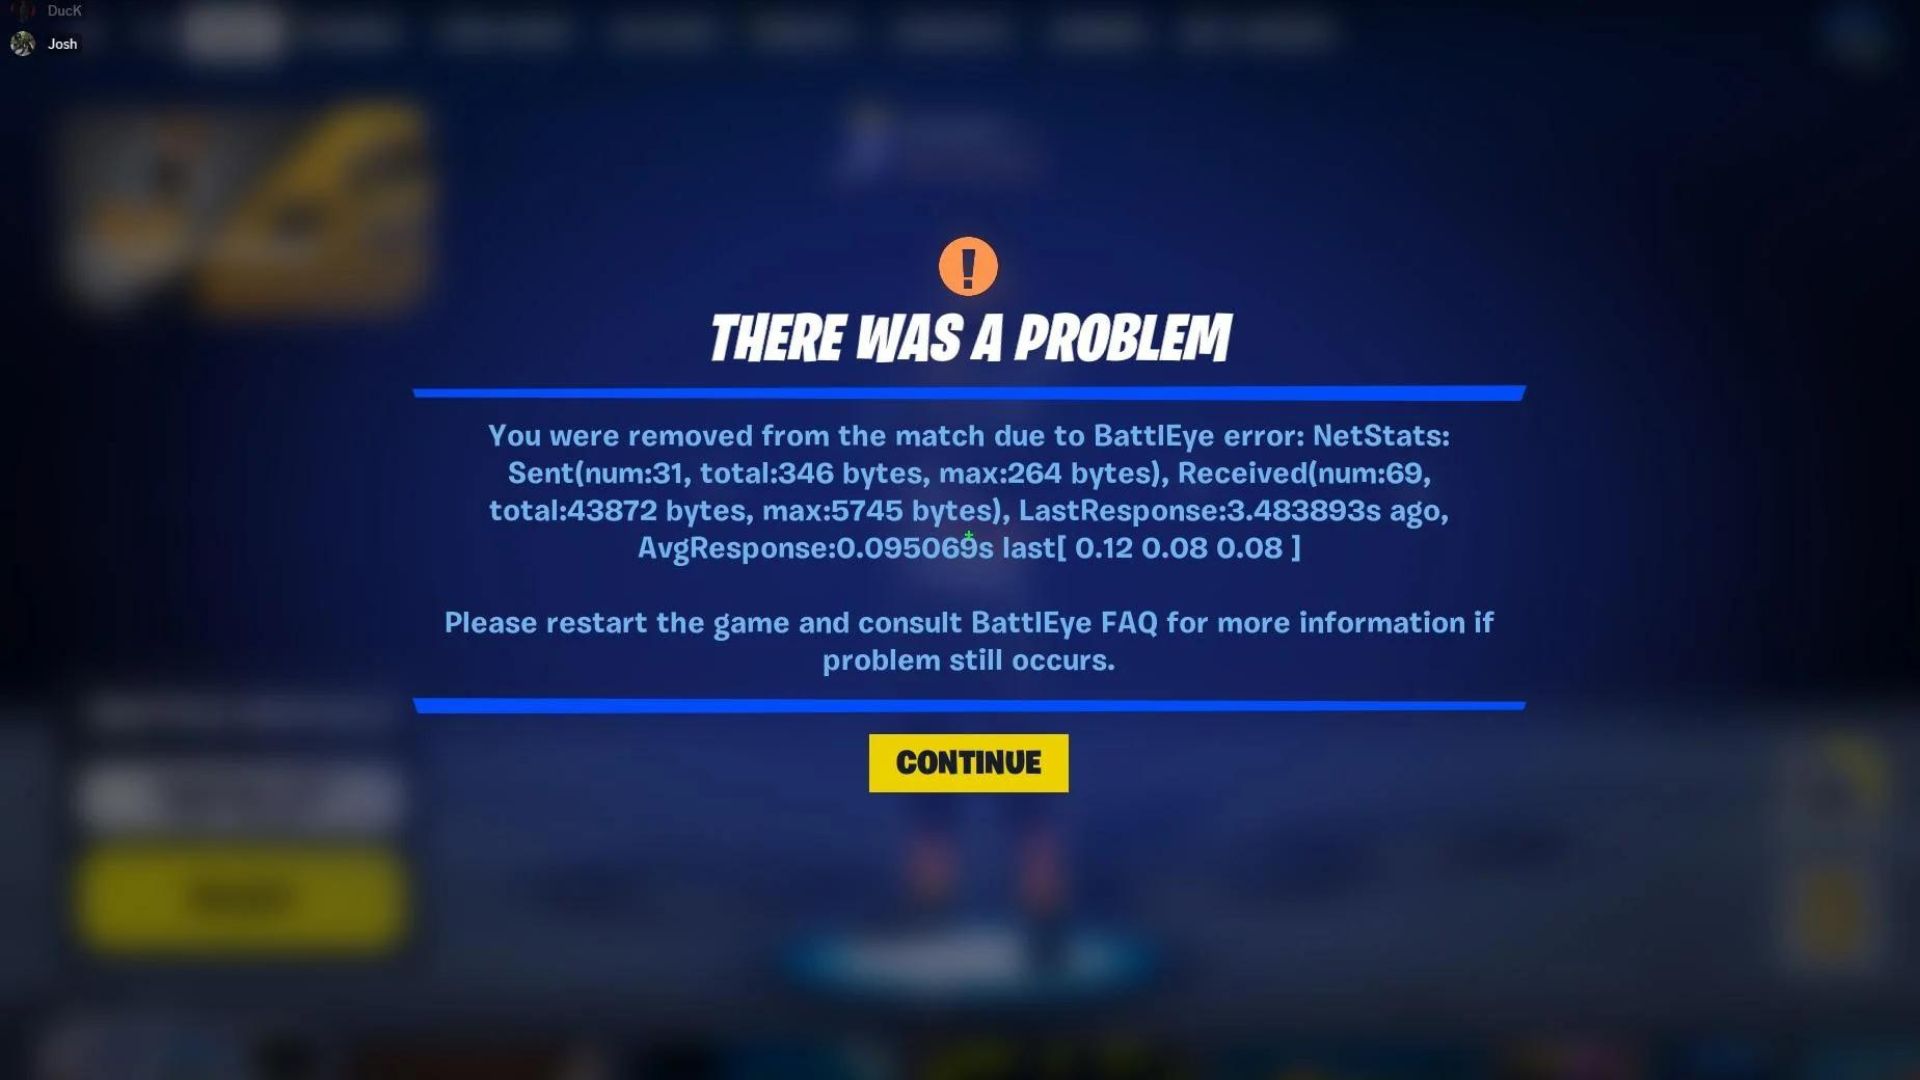 How to Resolve the "Media Streaming Error Detected" in Fortnite